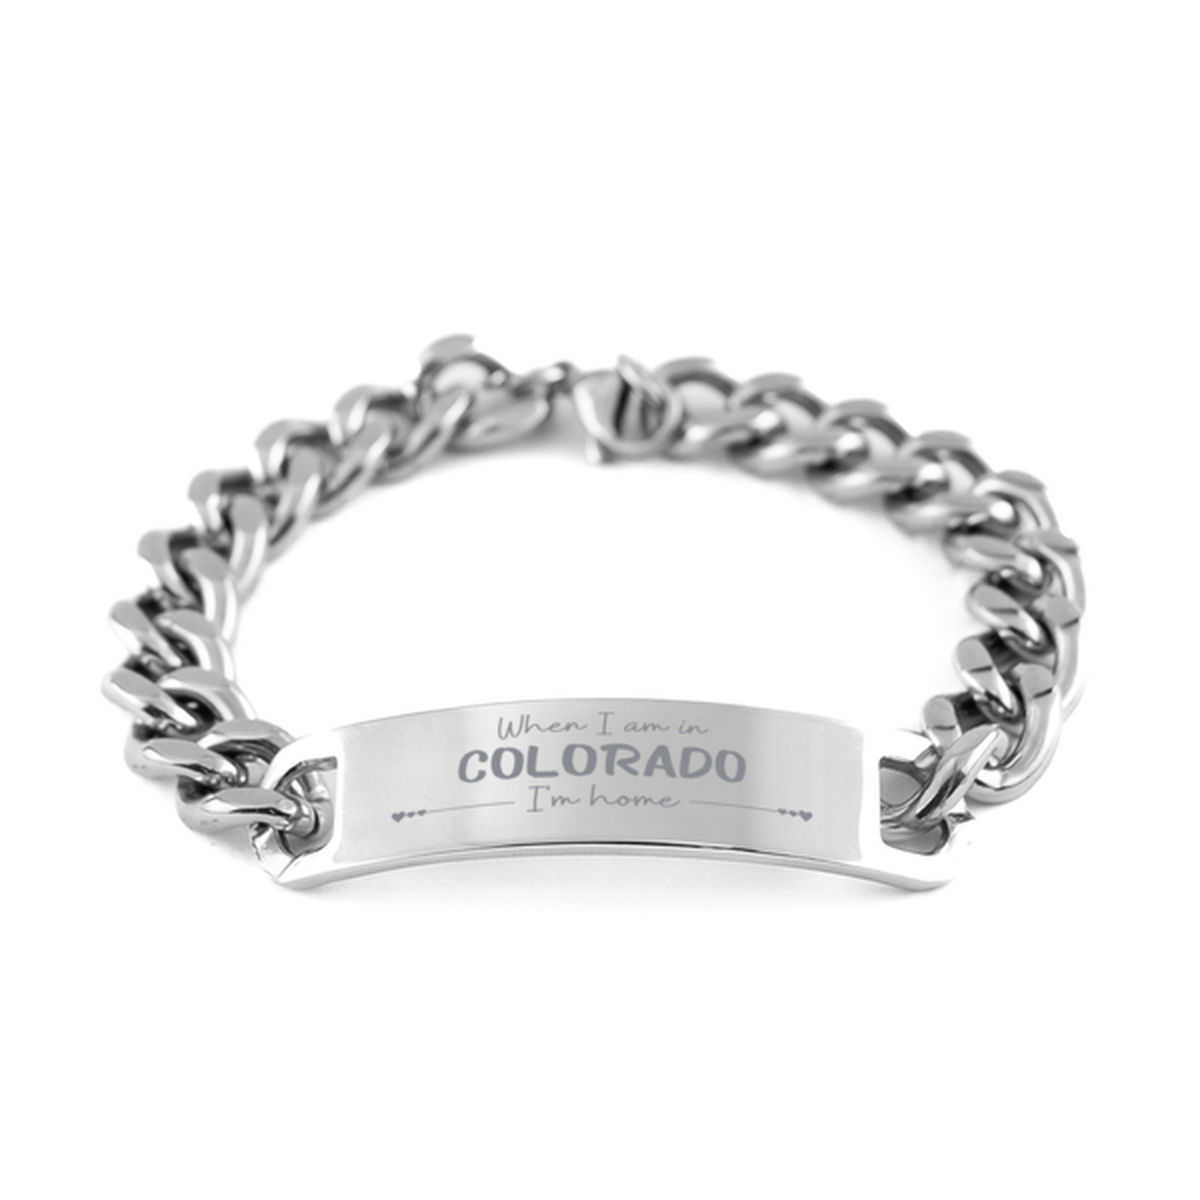 When I am in Colorado I'm home Cuban Chain Stainless Steel Bracelet, Cheap Gifts For Colorado, State Colorado Birthday Gifts for Friends Coworker